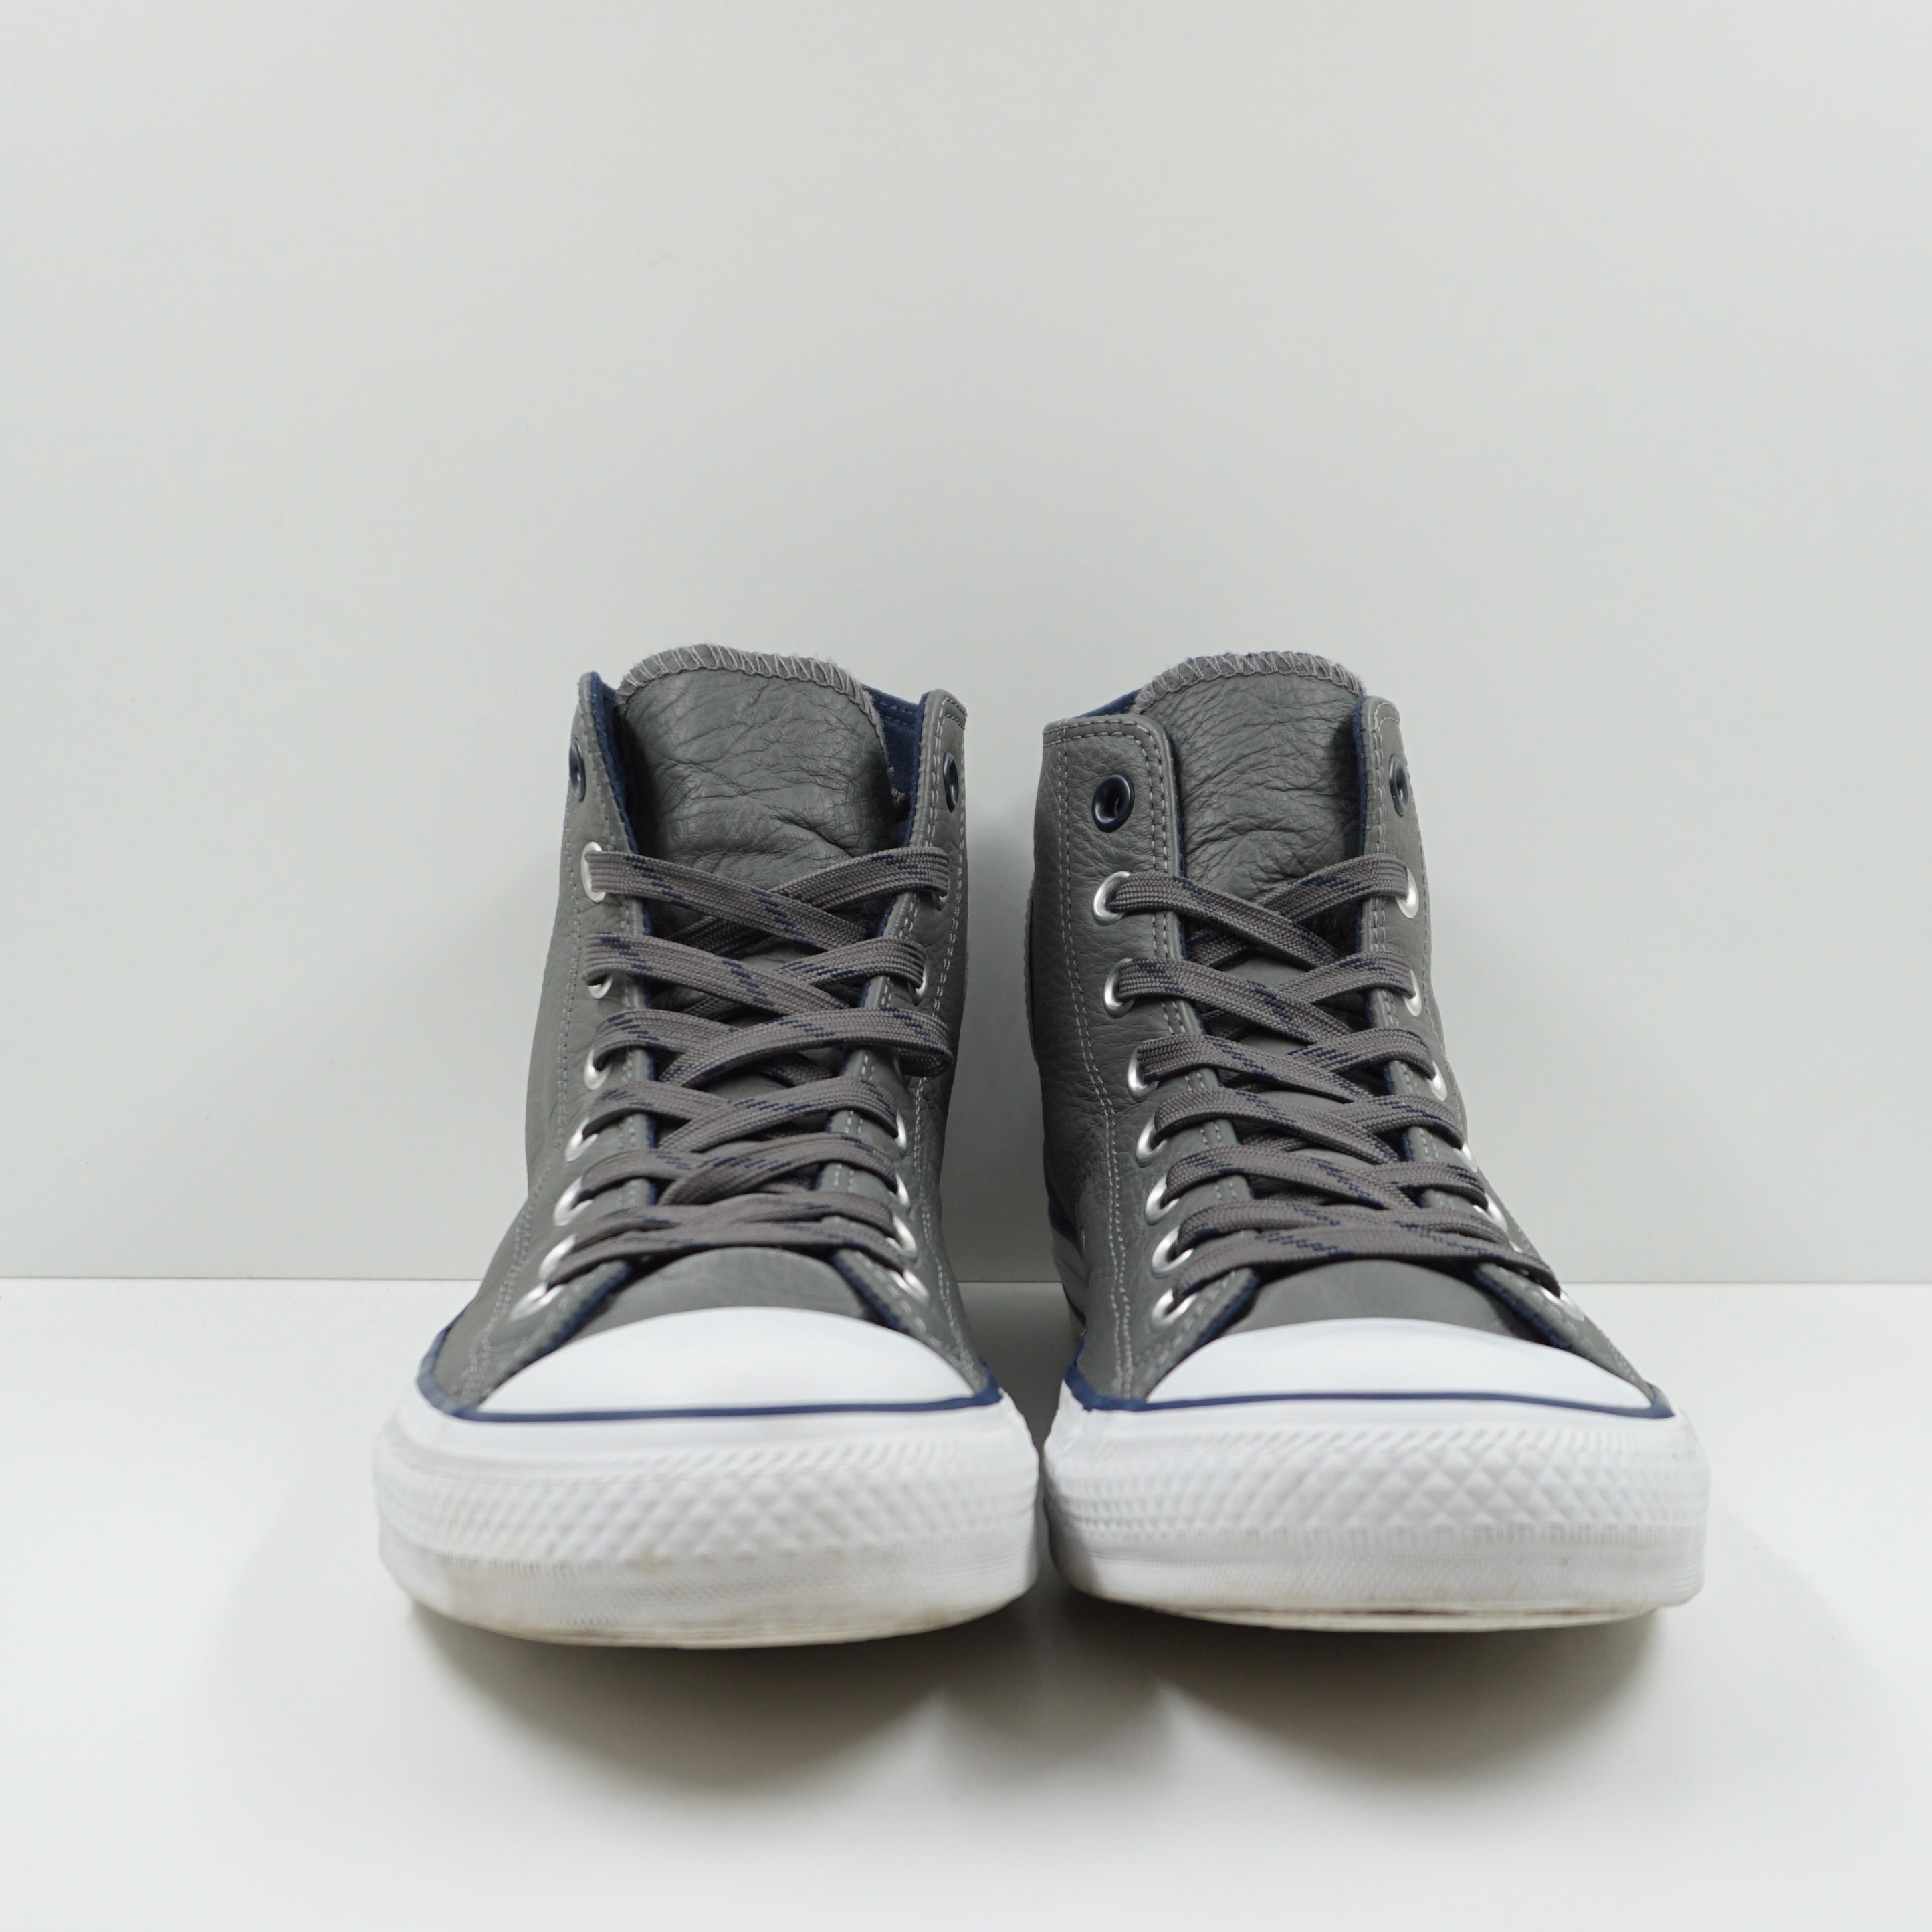 Converse Chuck Taylor All Star Leather High Charcoal Grey